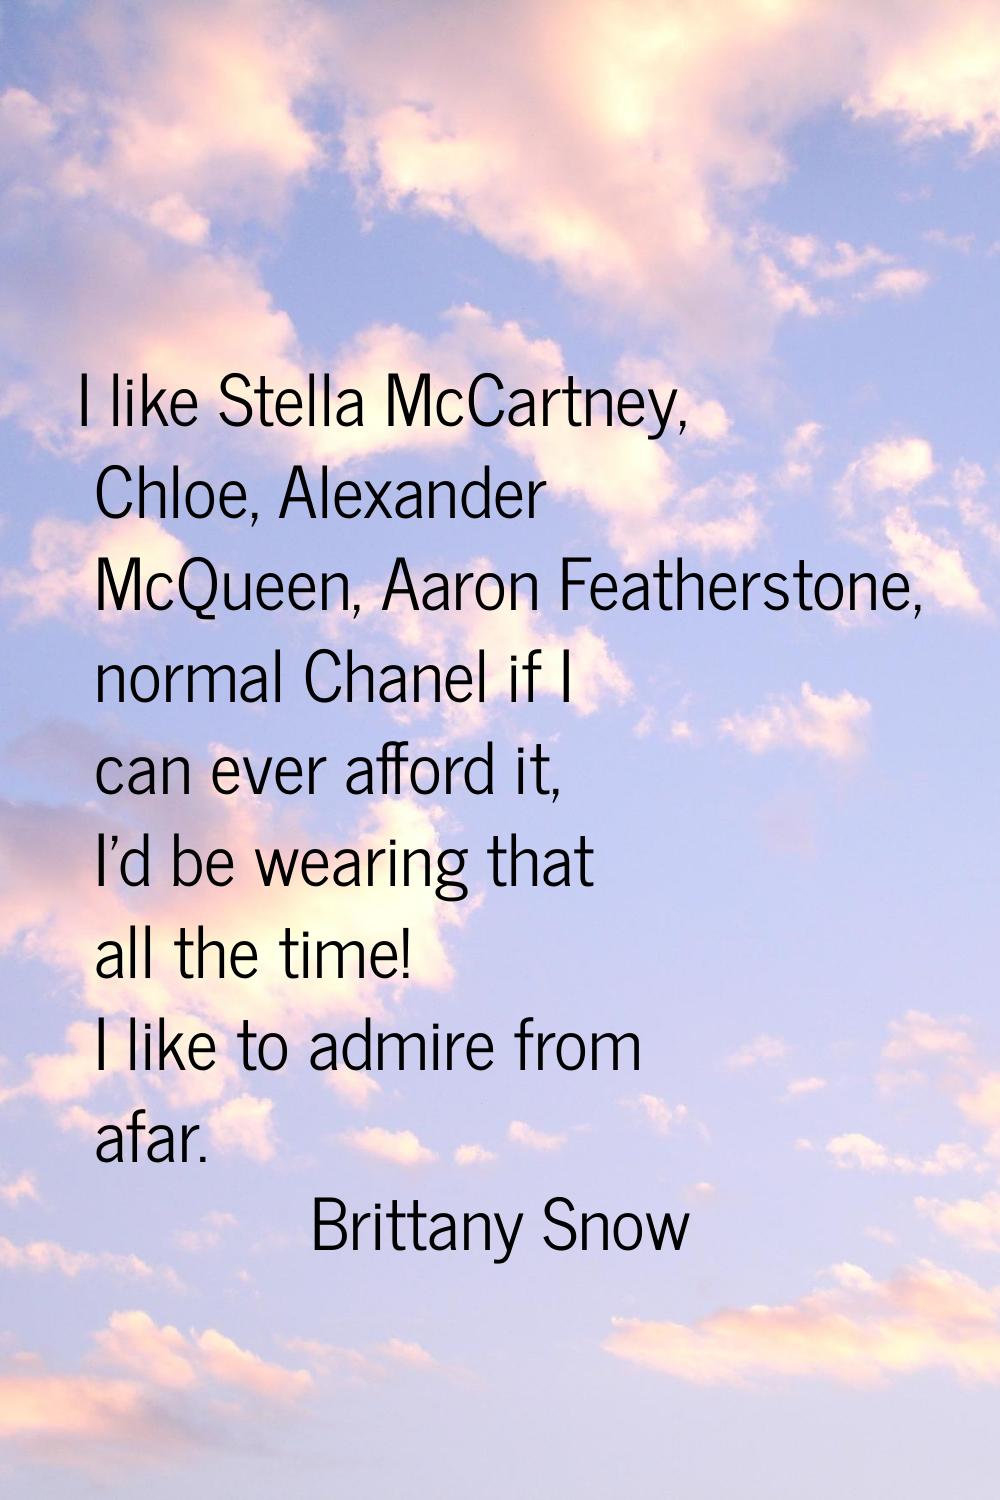 I like Stella McCartney, Chloe, Alexander McQueen, Aaron Featherstone, normal Chanel if I can ever 